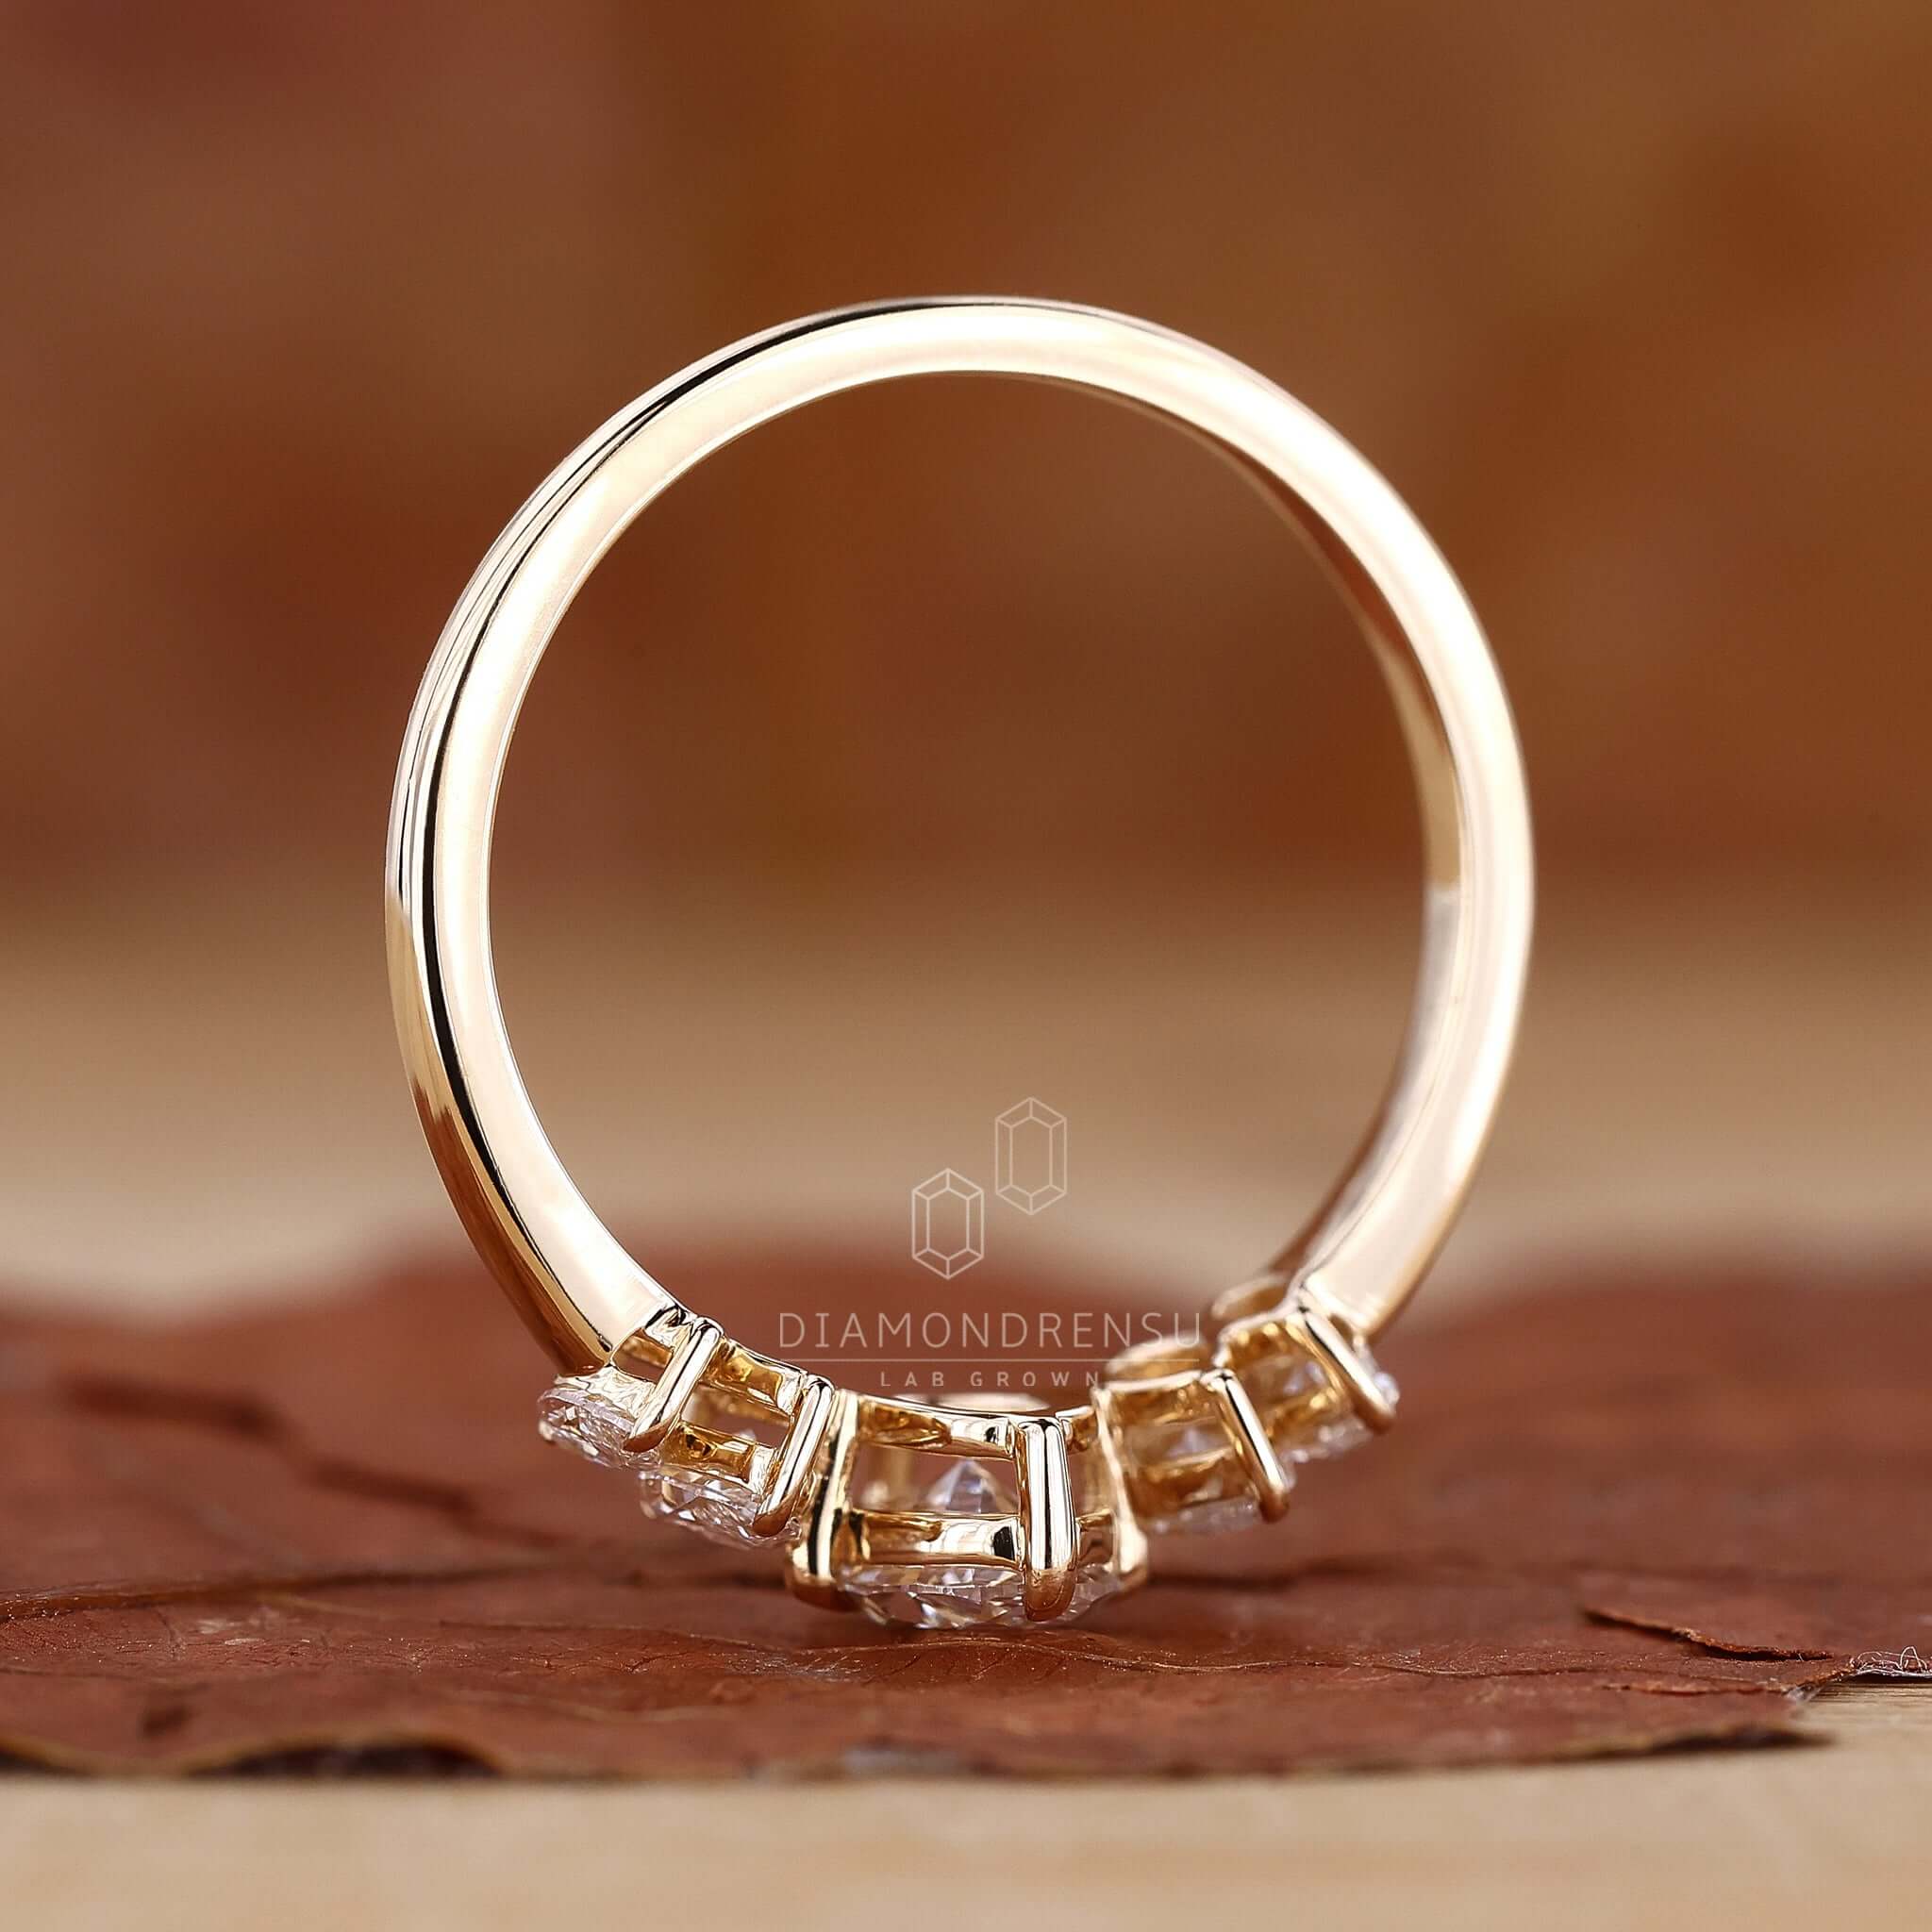 Hand wearing a gold oval diamond engagement ring, emphasizing its radiant elegance and style